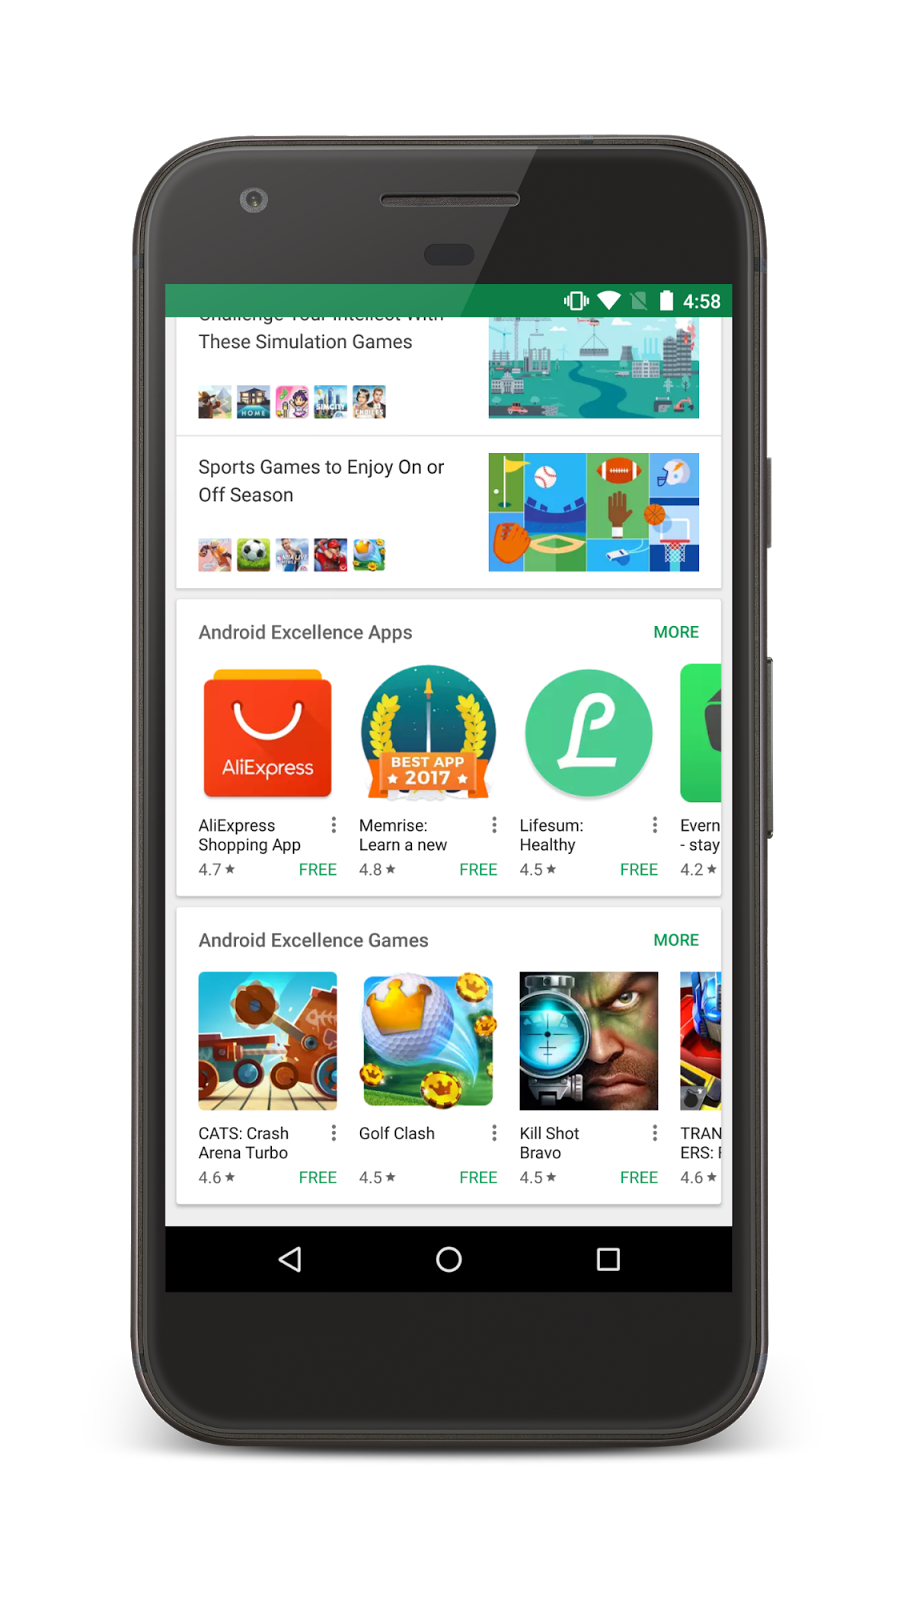 New apps & games added to Android Excellence list 4